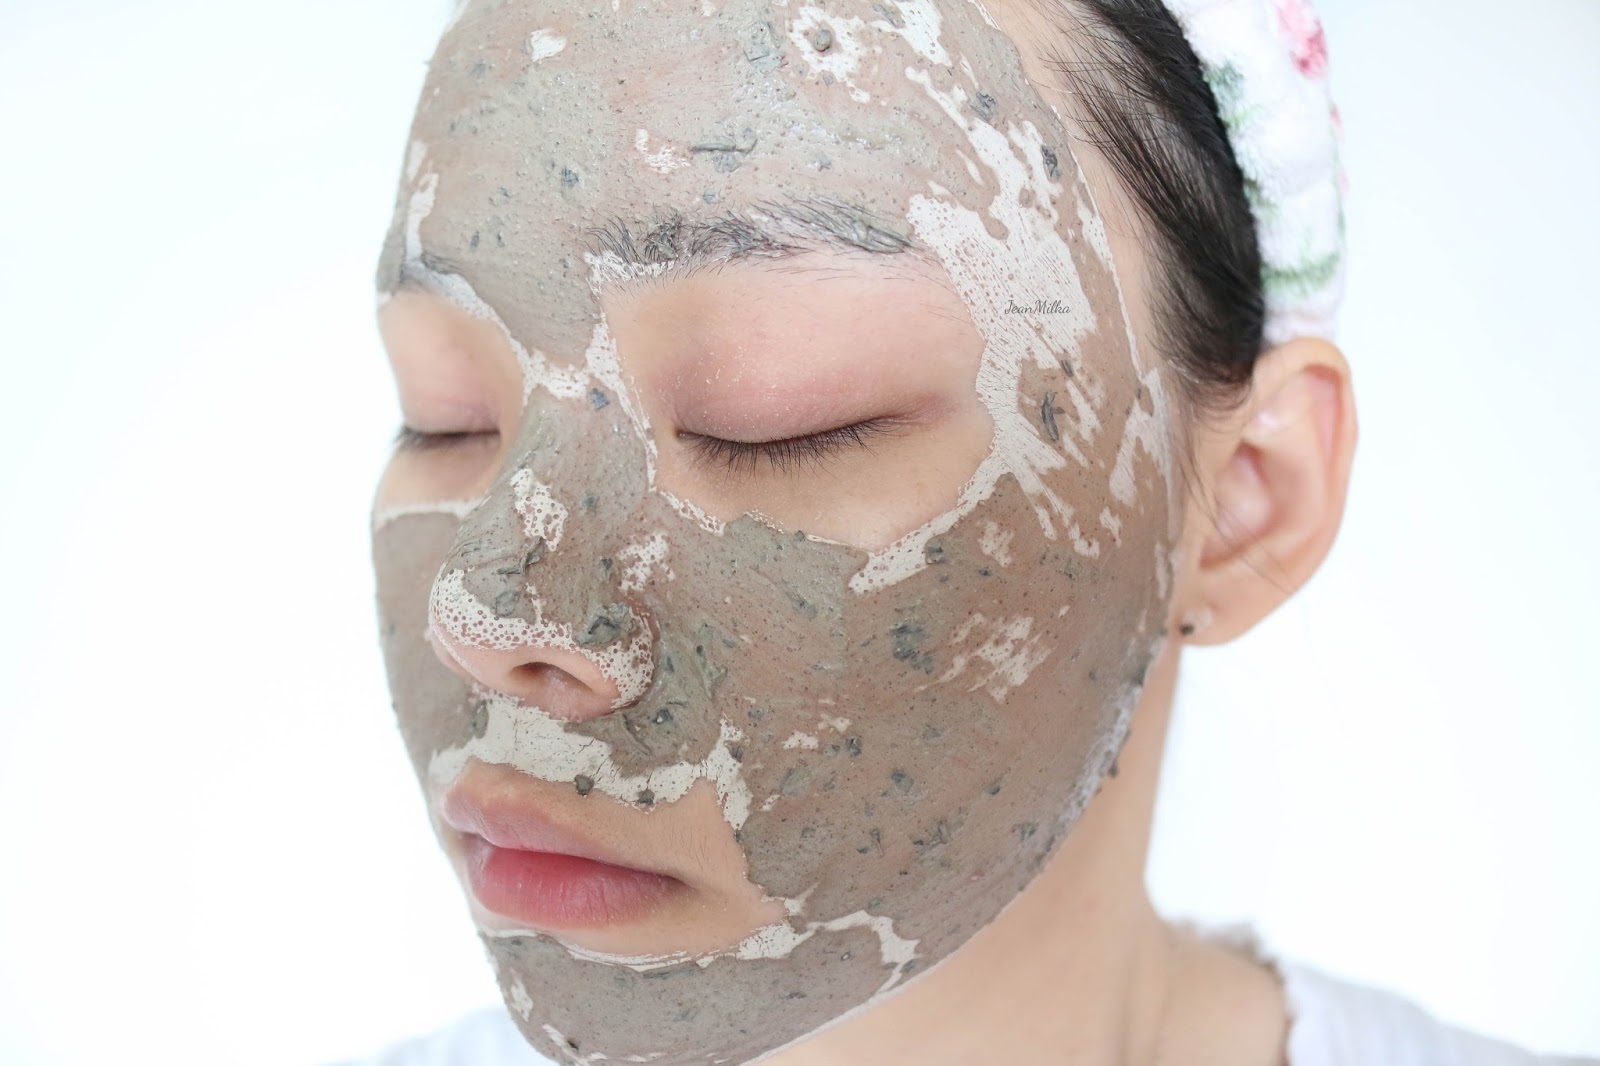 the body shop, body shop, superfood mask, the body shop mask, the body shop superfood mask, the body shop skincare, skincare, mask, masker, masker superfood, masker wajah, face mask, new face mask, review, product review, himalayan charcoal mask, himalayan charcoal purifying glow mask